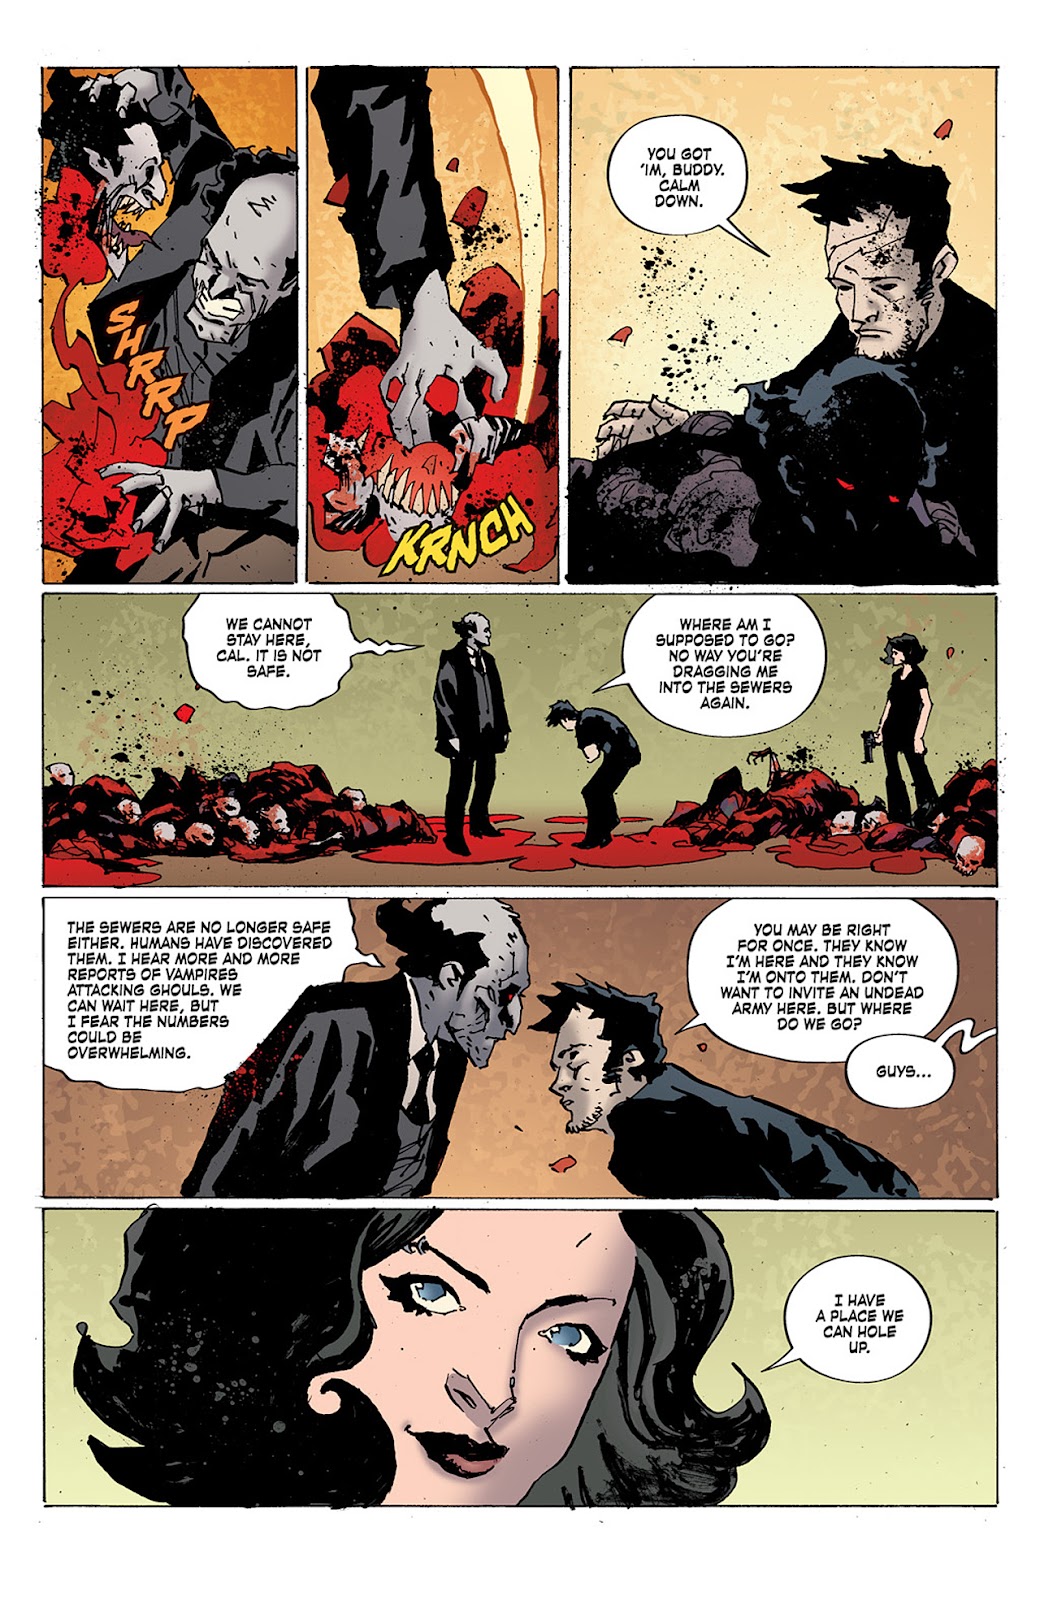 Criminal Macabre: Final Night - The 30 Days of Night Crossover issue 2 - Page 22